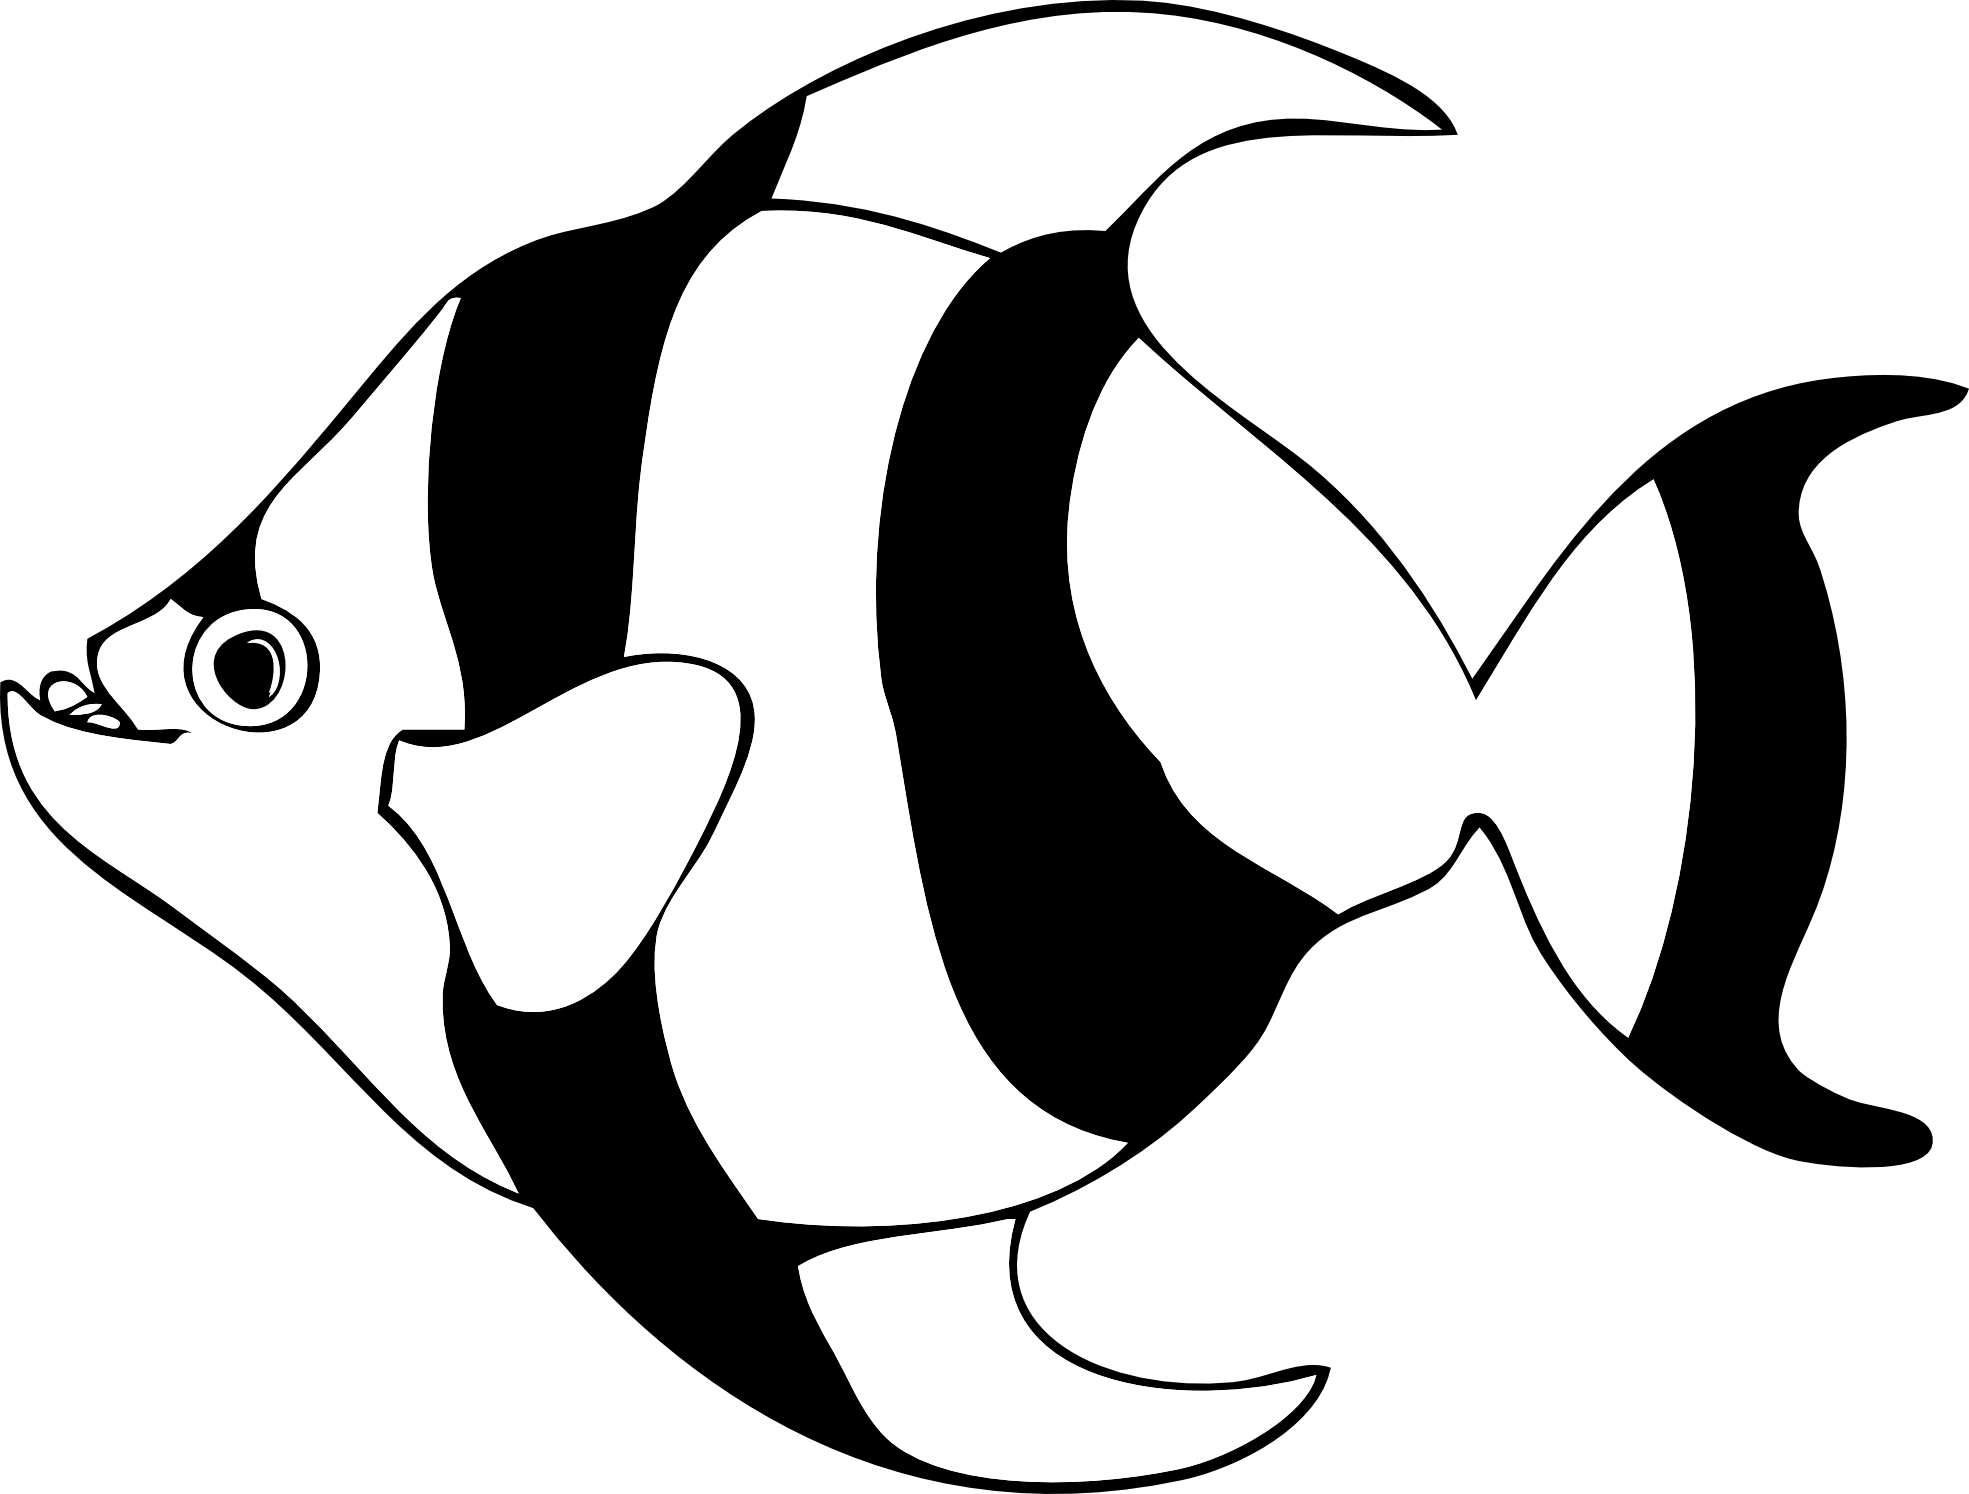 Free Fin Clipart Black And White, Download Free Fin Clipart Black And